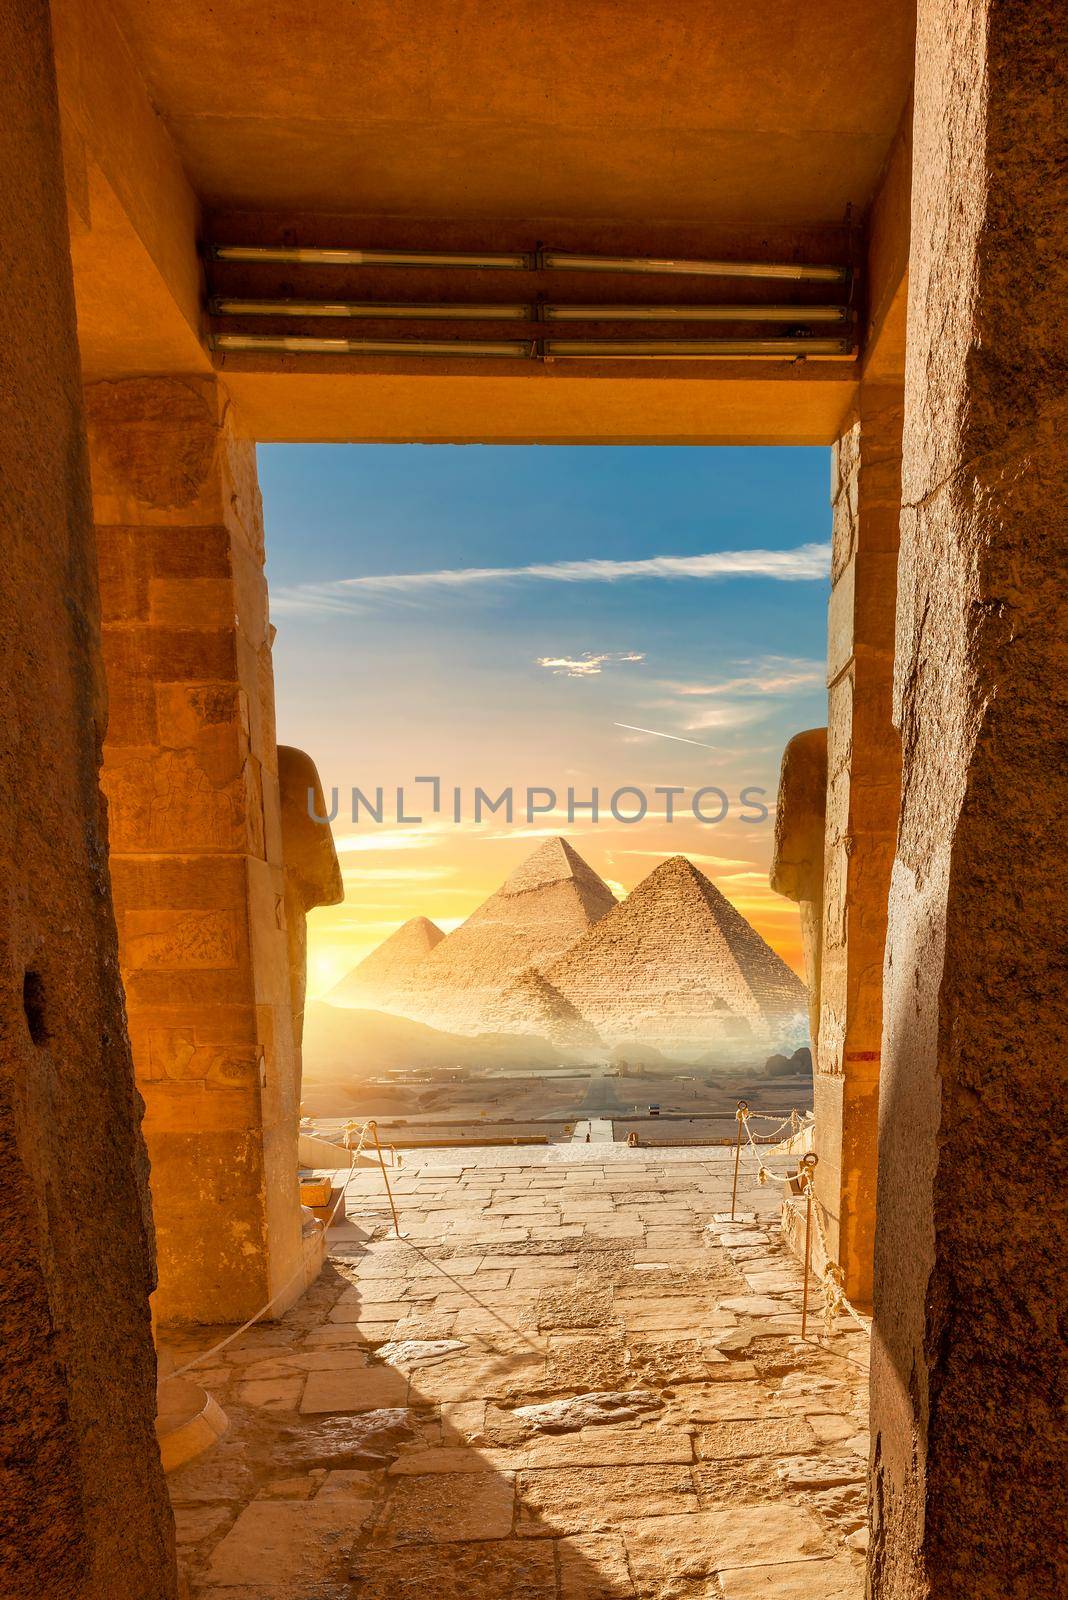 View from the tomb by Givaga